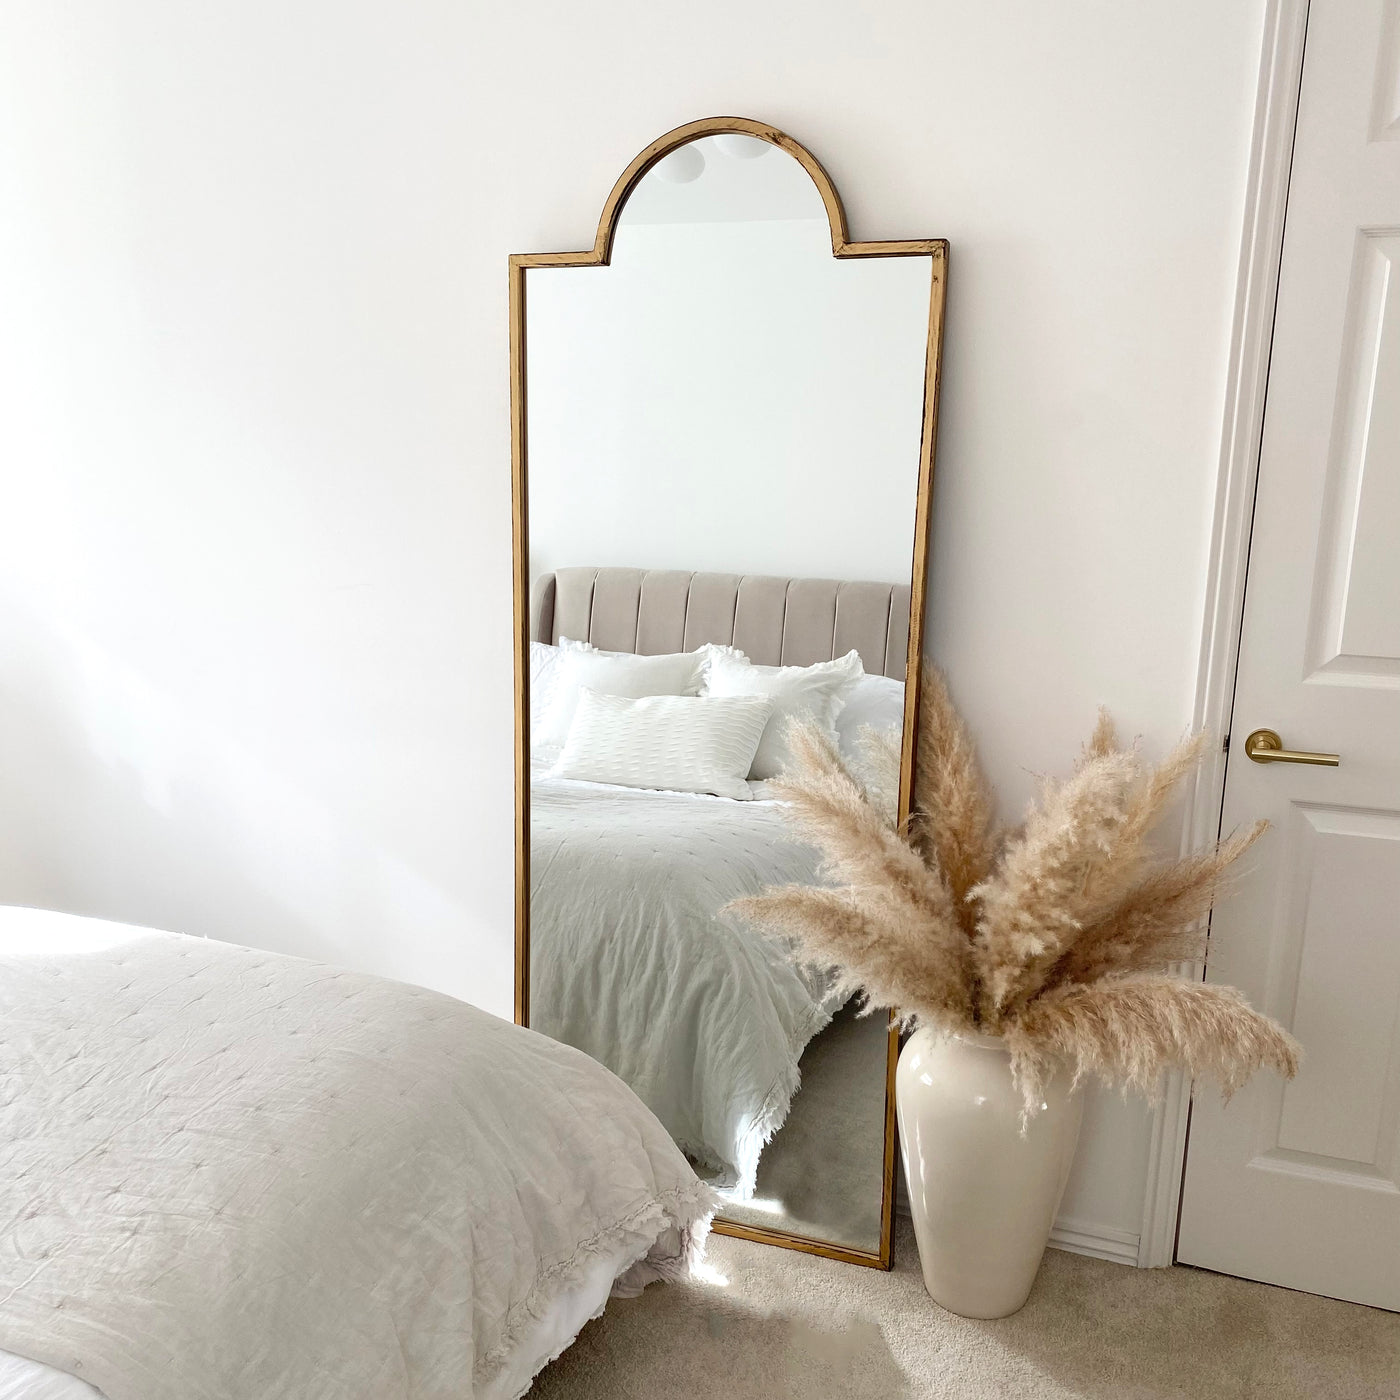 Full length gold industrial arched metal mirror in bedroom